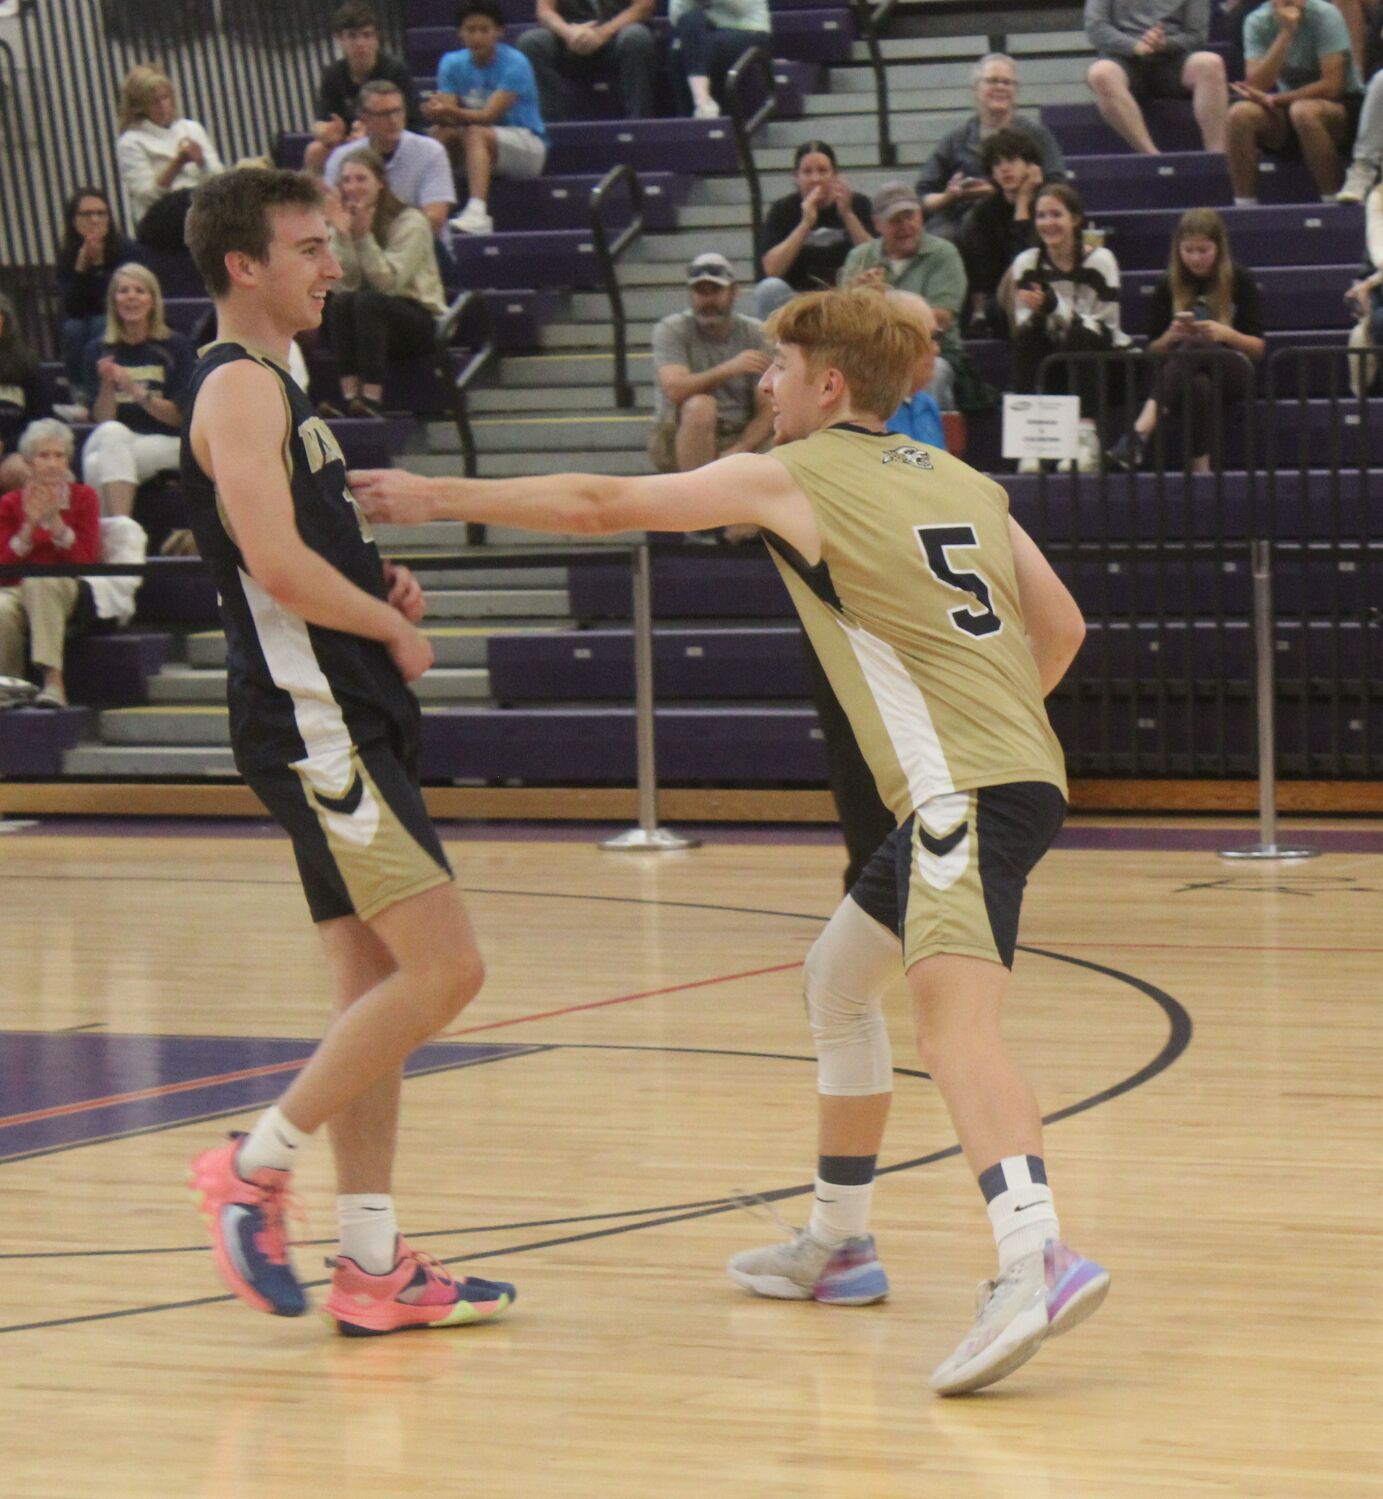 Boys Volleyball 2025: Exciting Preview for Windham, Salem, Pinkerton, and Timberlane Teams